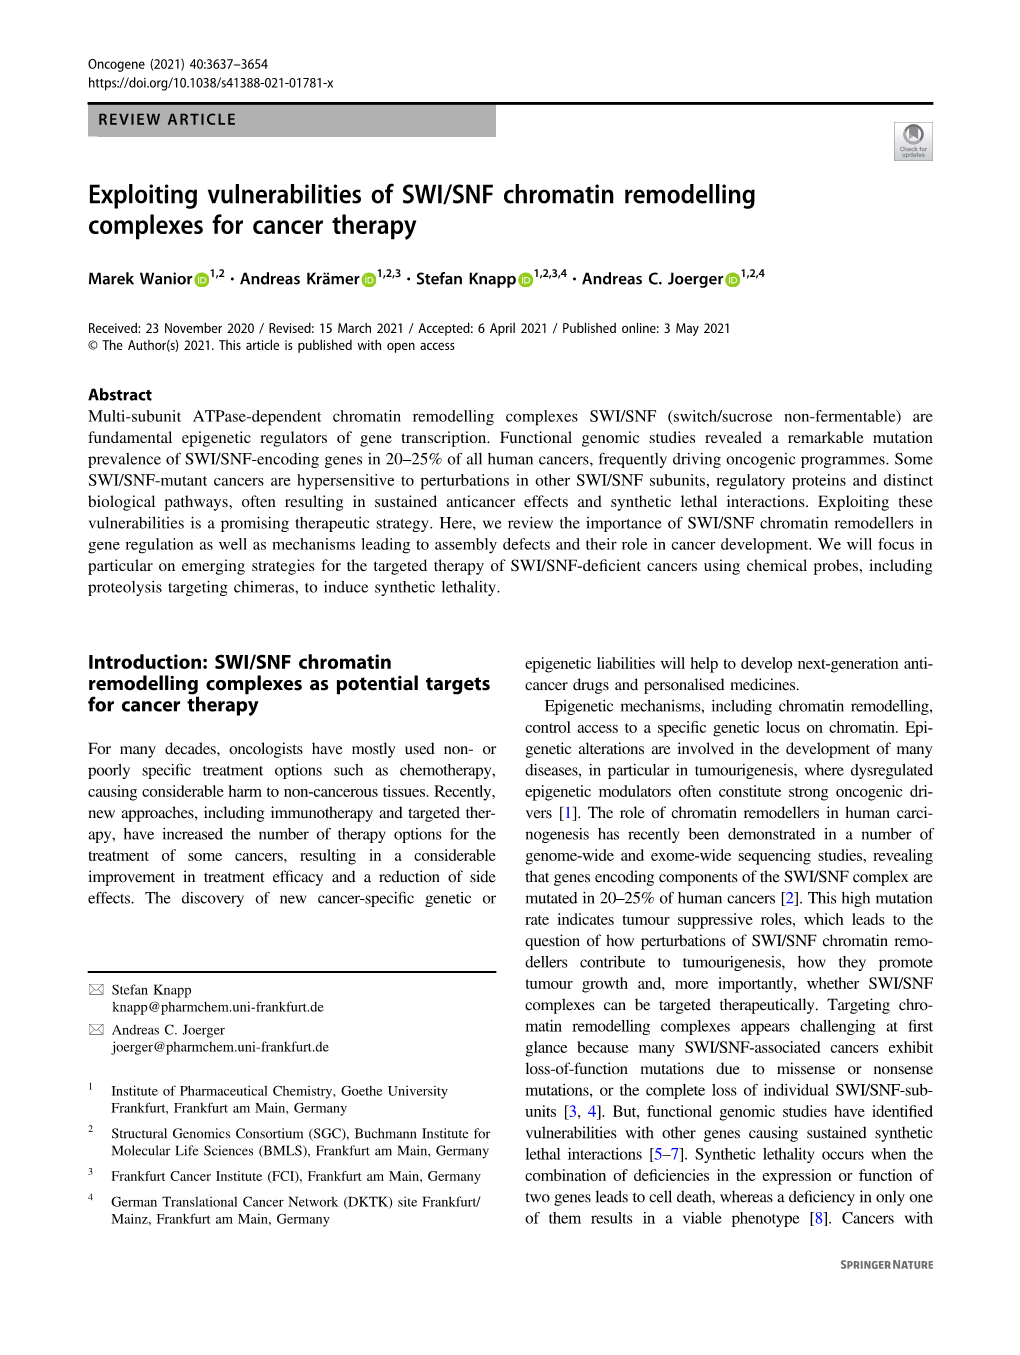 Exploiting Vulnerabilities of SWI/SNF Chromatin Remodelling Complexes for Cancer Therapy